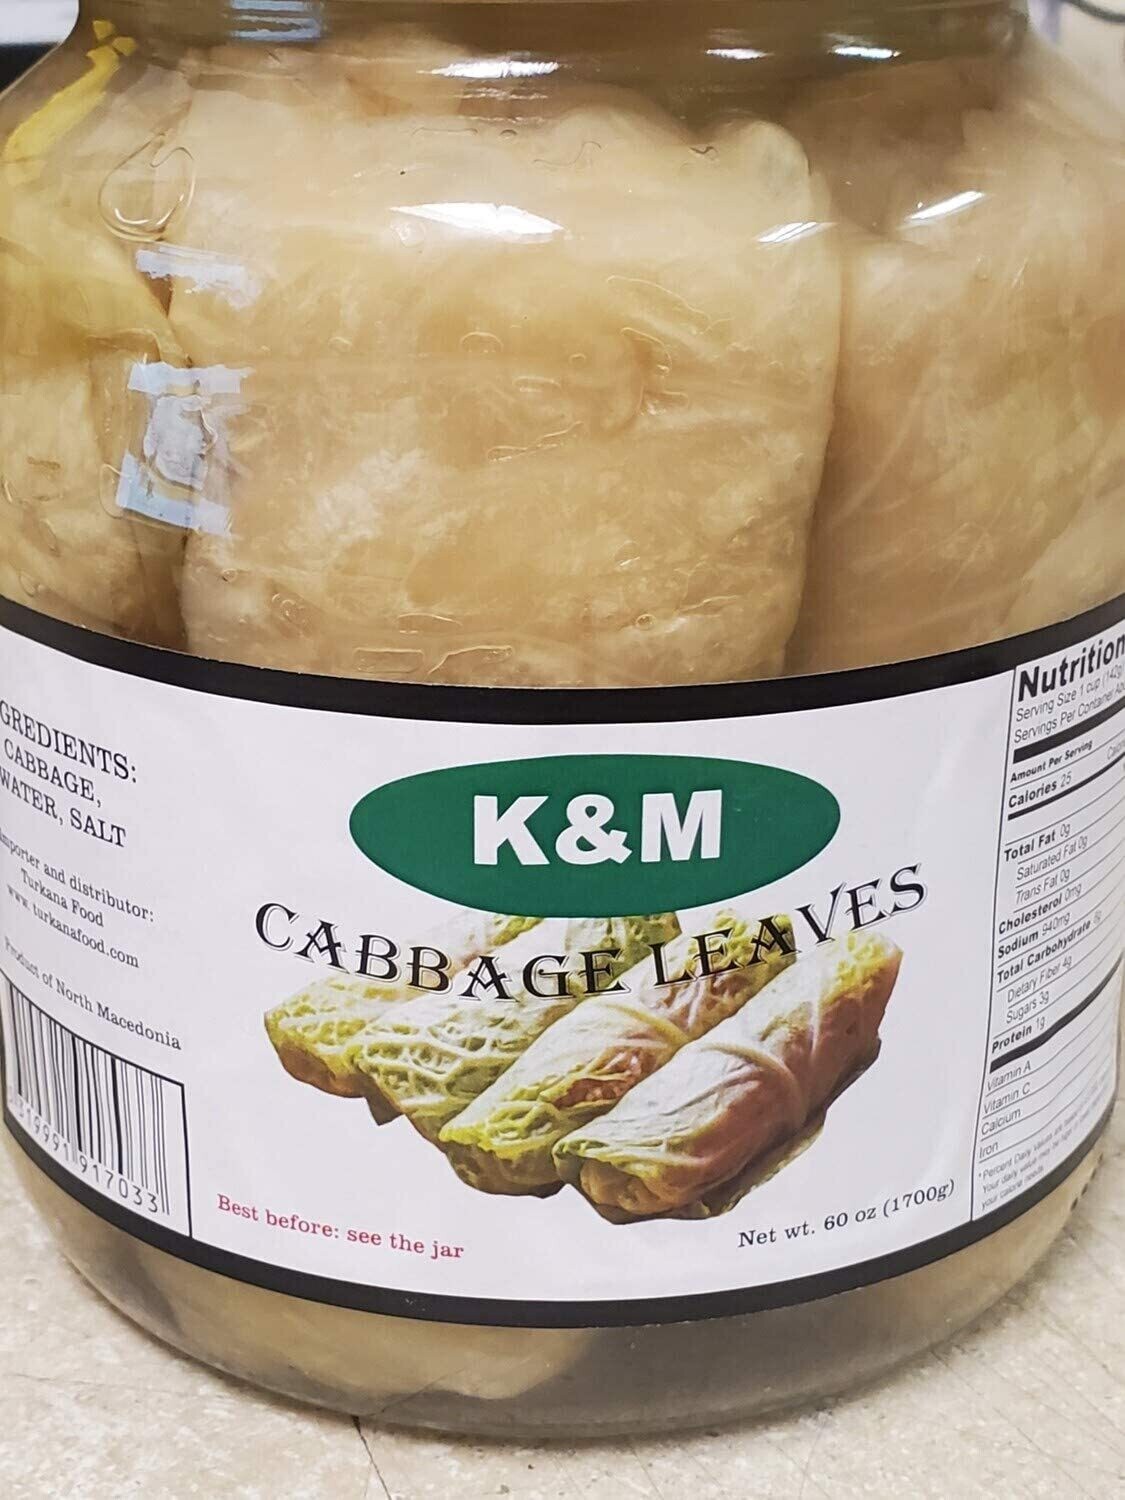 K&M Cabbage Leaves - 1700g in Brine - Halal - Product Of Bulgaria